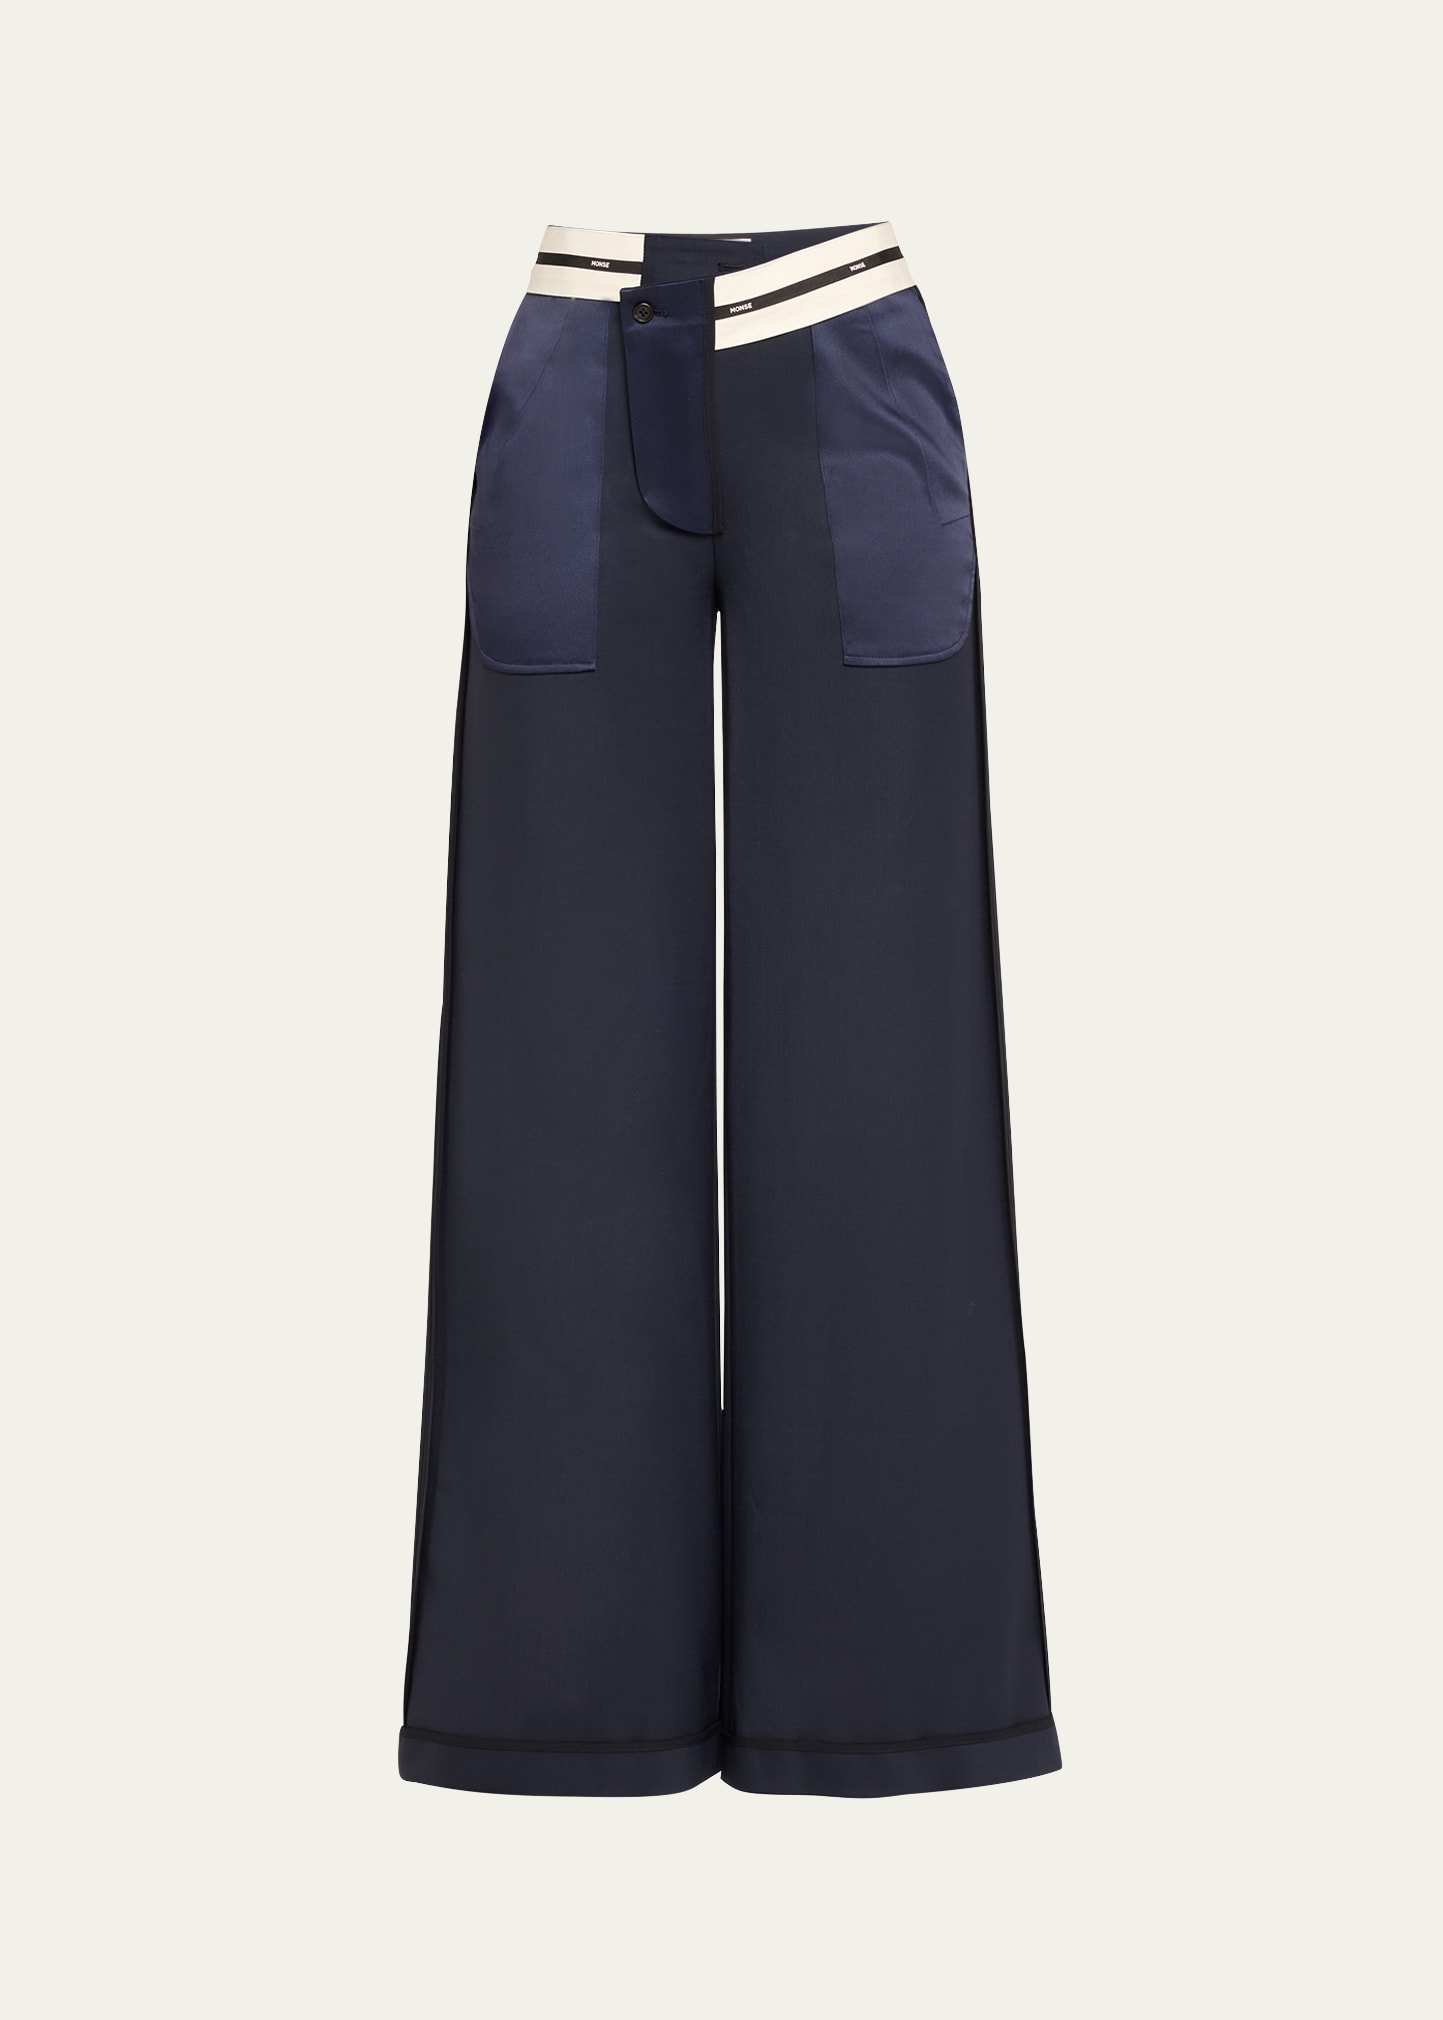 Inside Out Tailored Wide Leg Wool Trousers